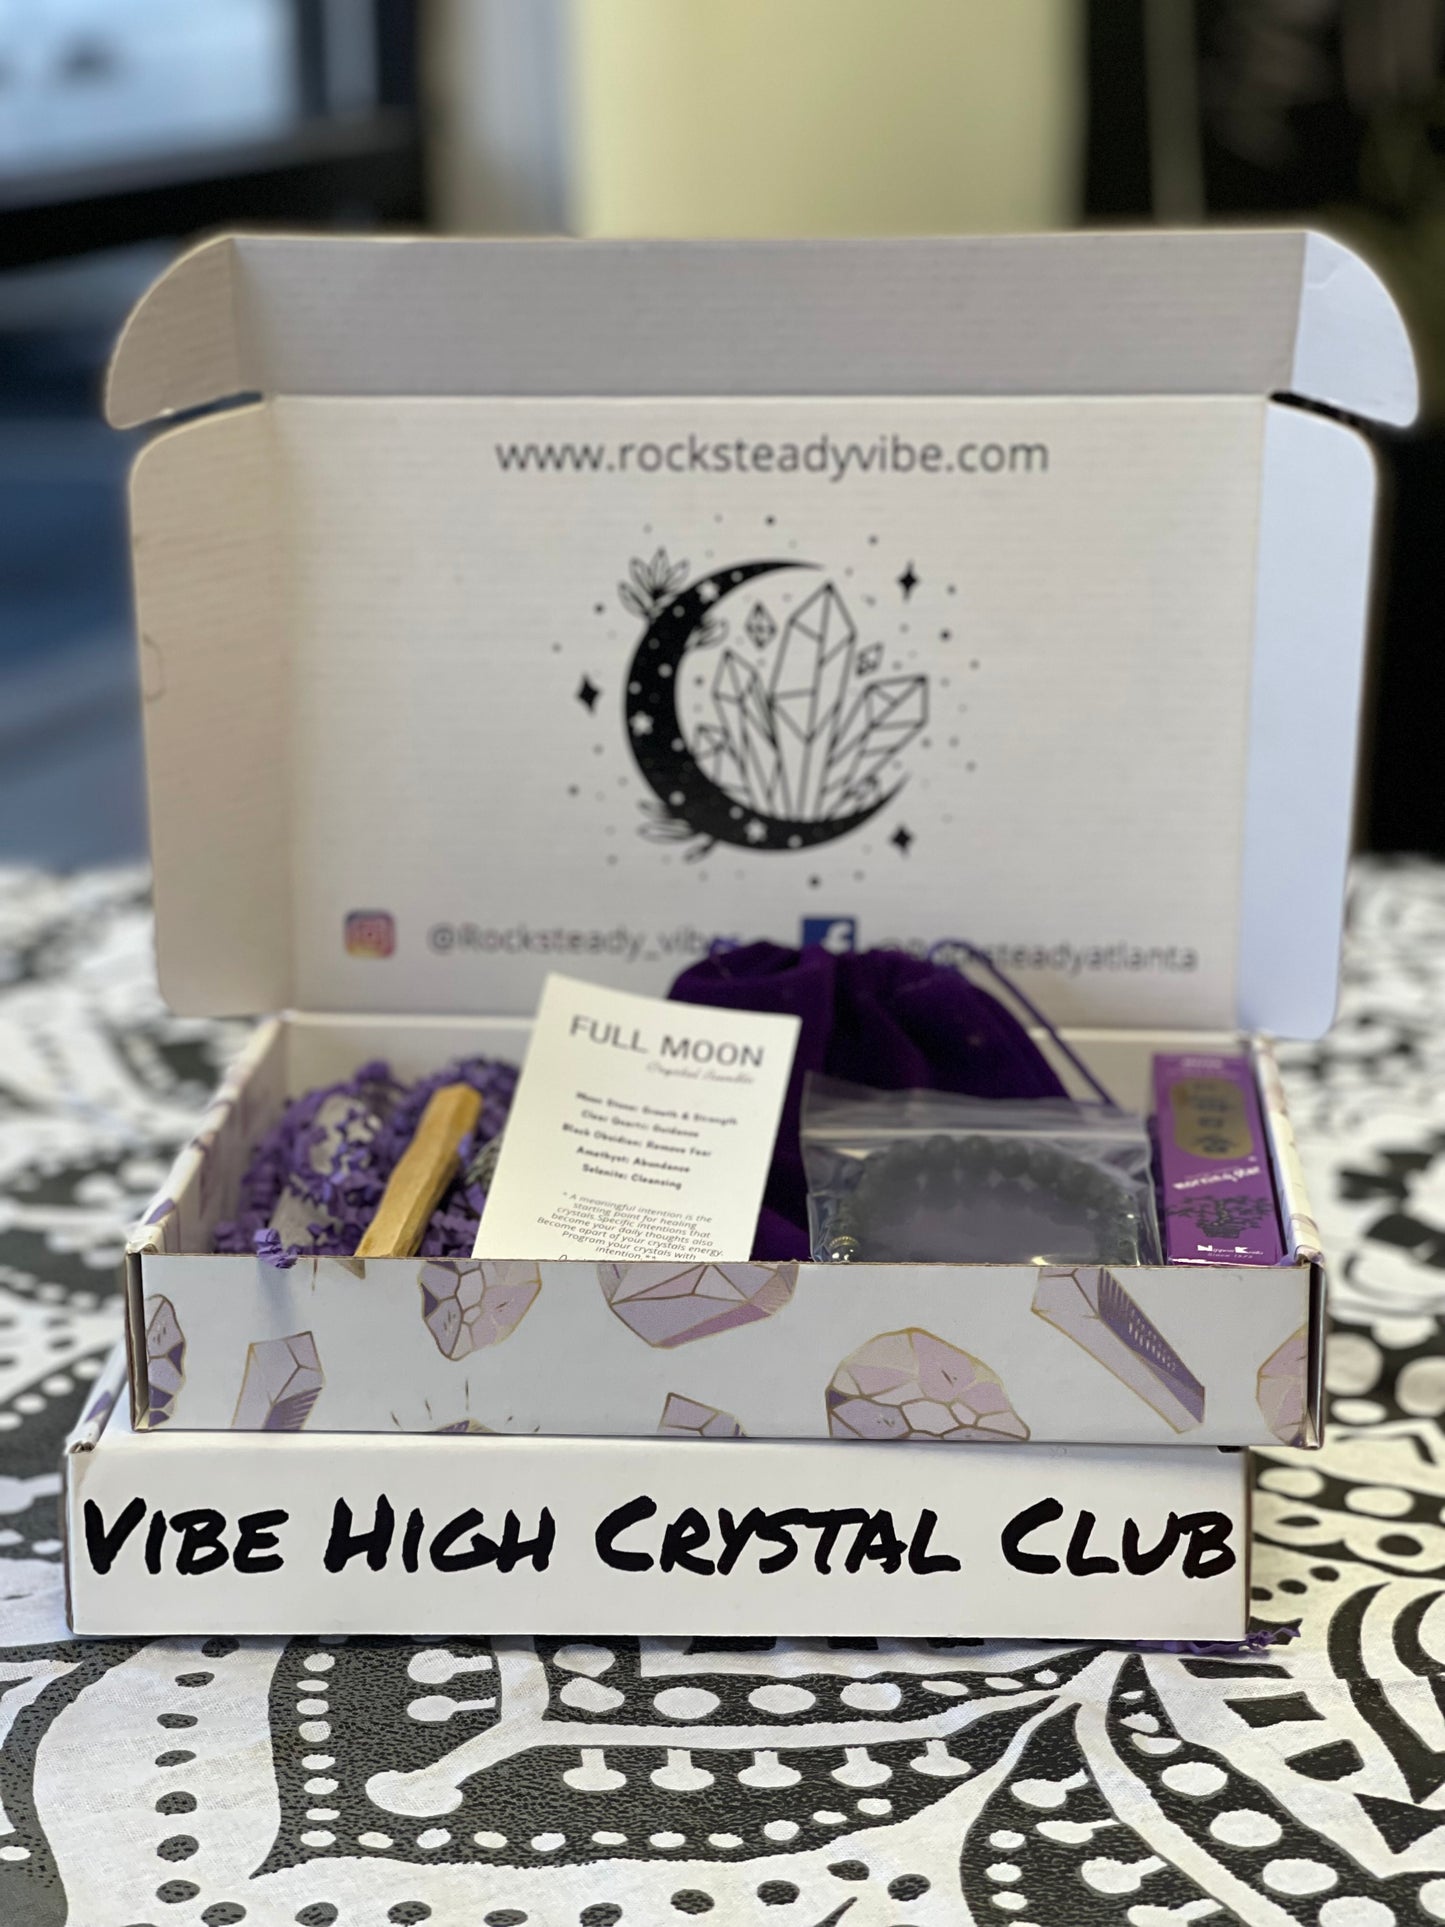 22:22 Vibe High Crystal Club (Monthly Subscription)